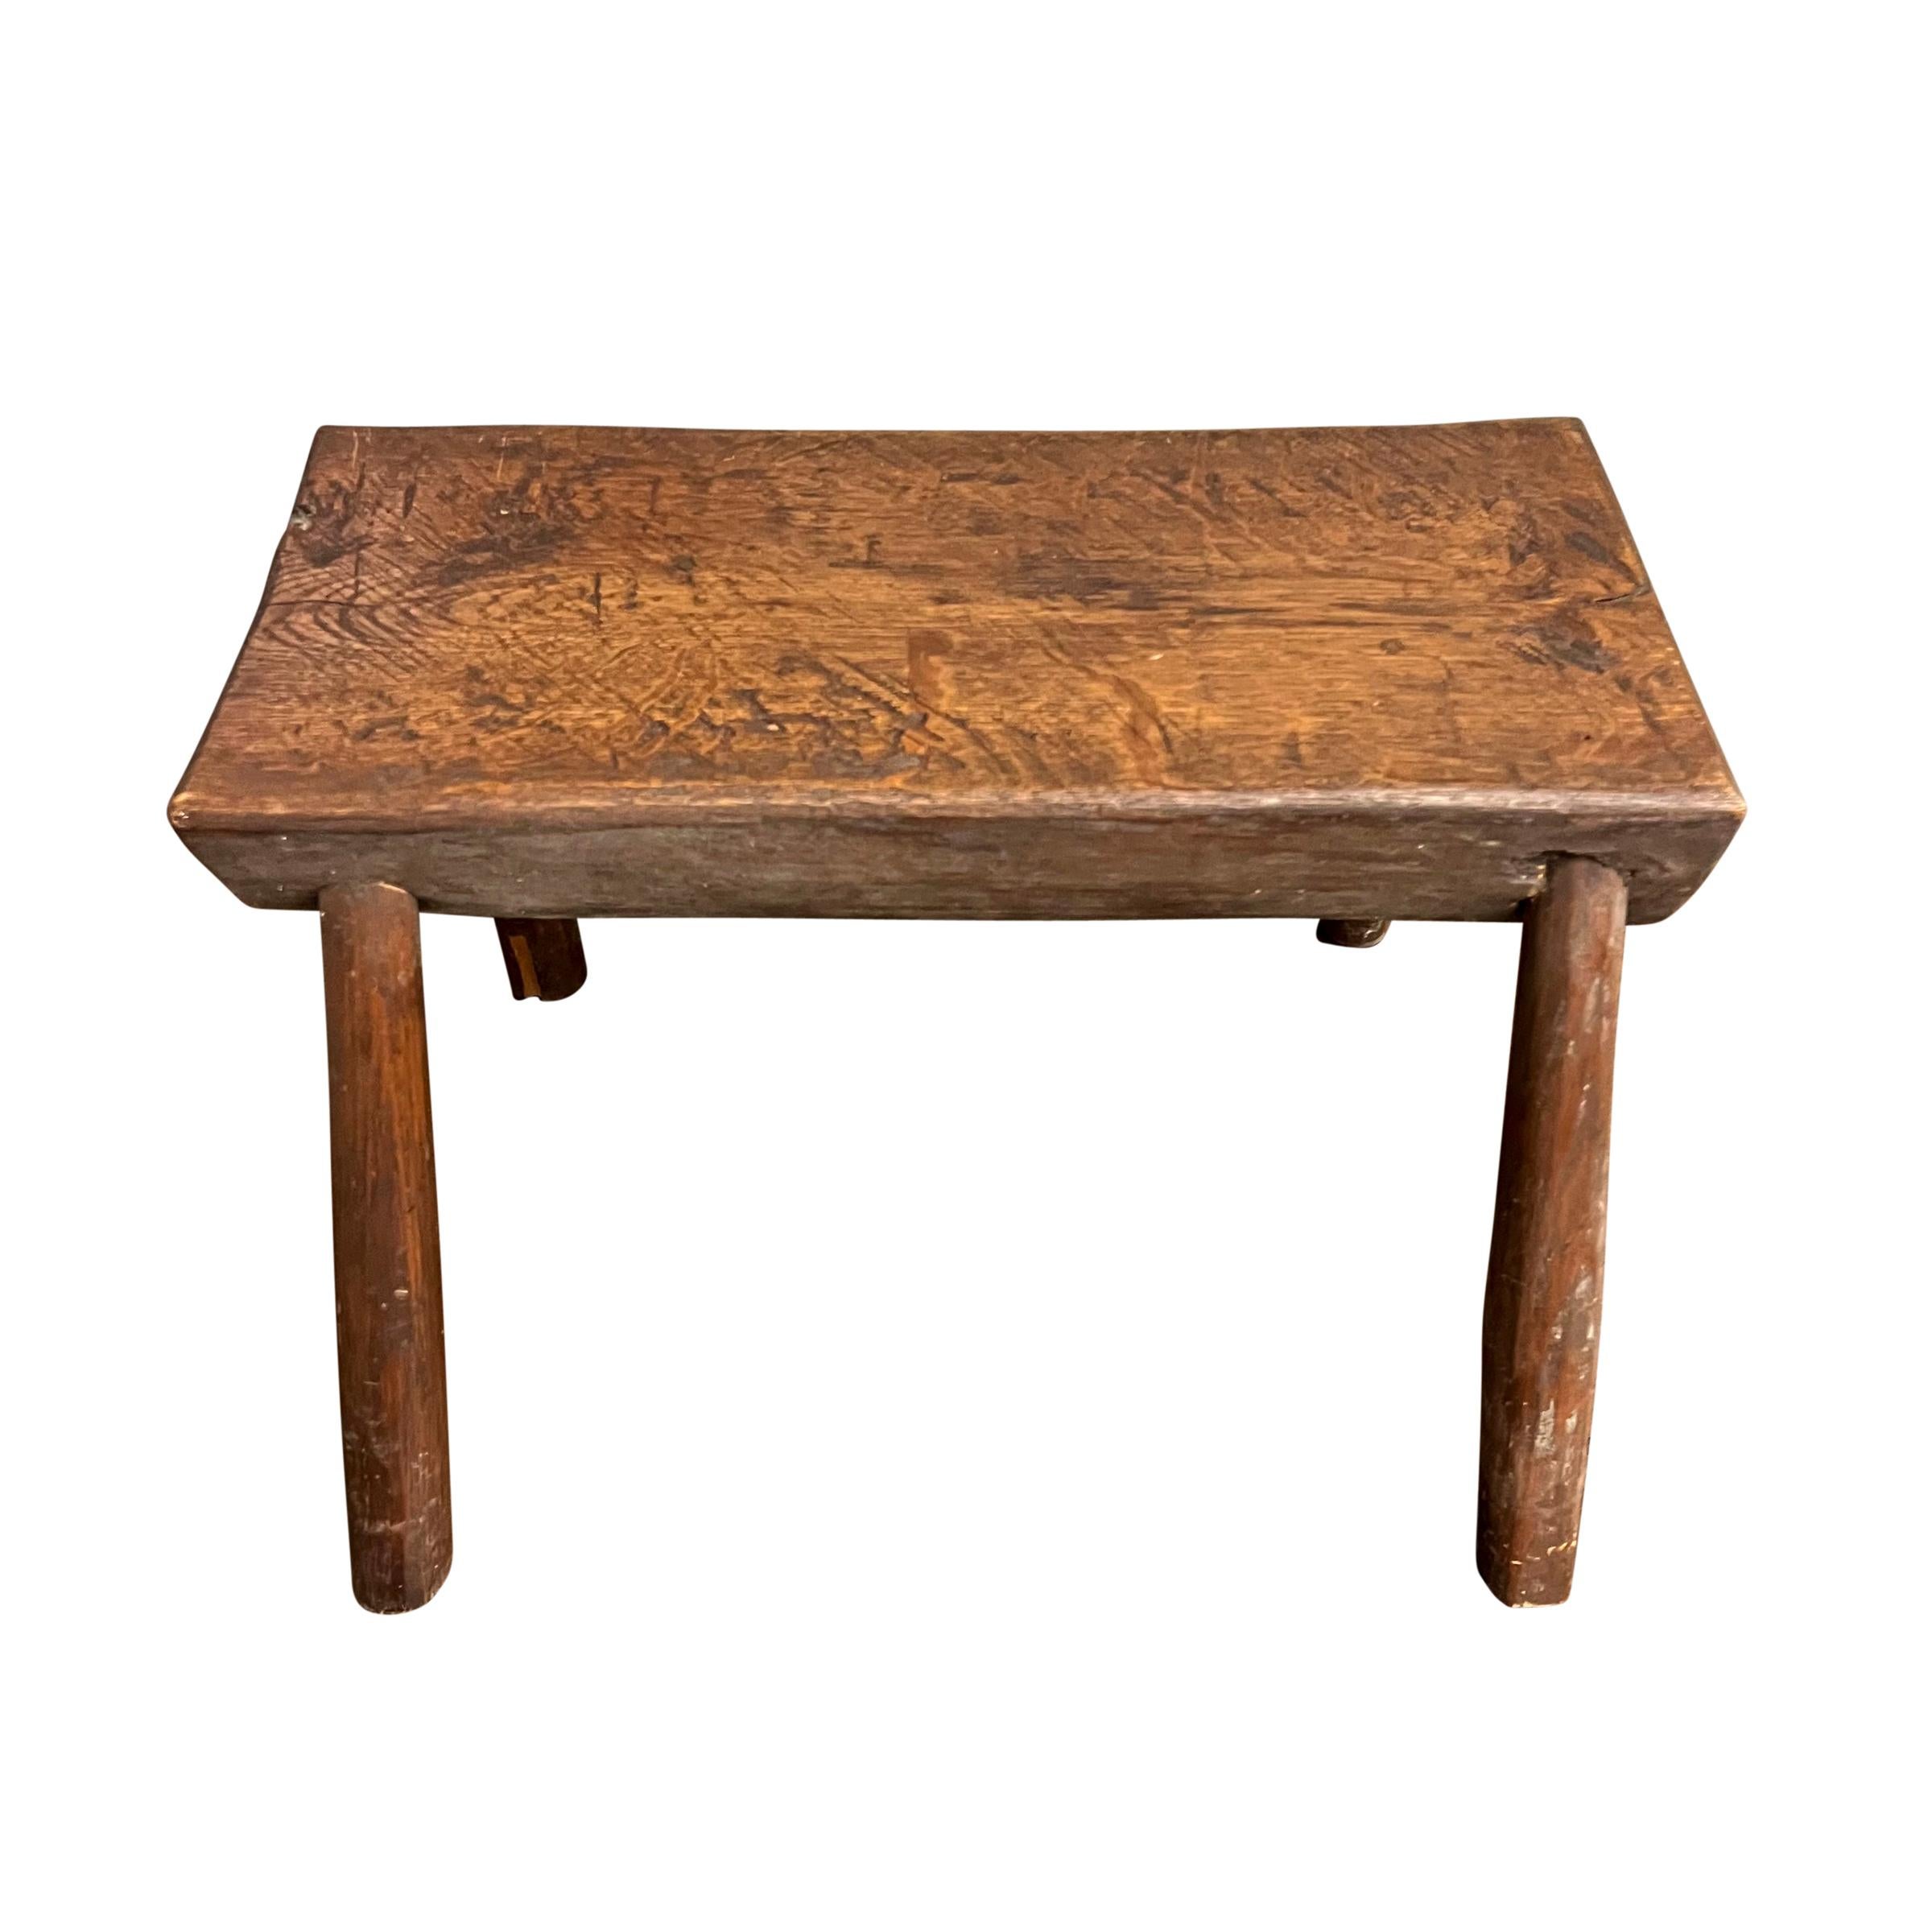 Early 20th Century American Primitive Milking Stool In Good Condition For Sale In Chicago, IL